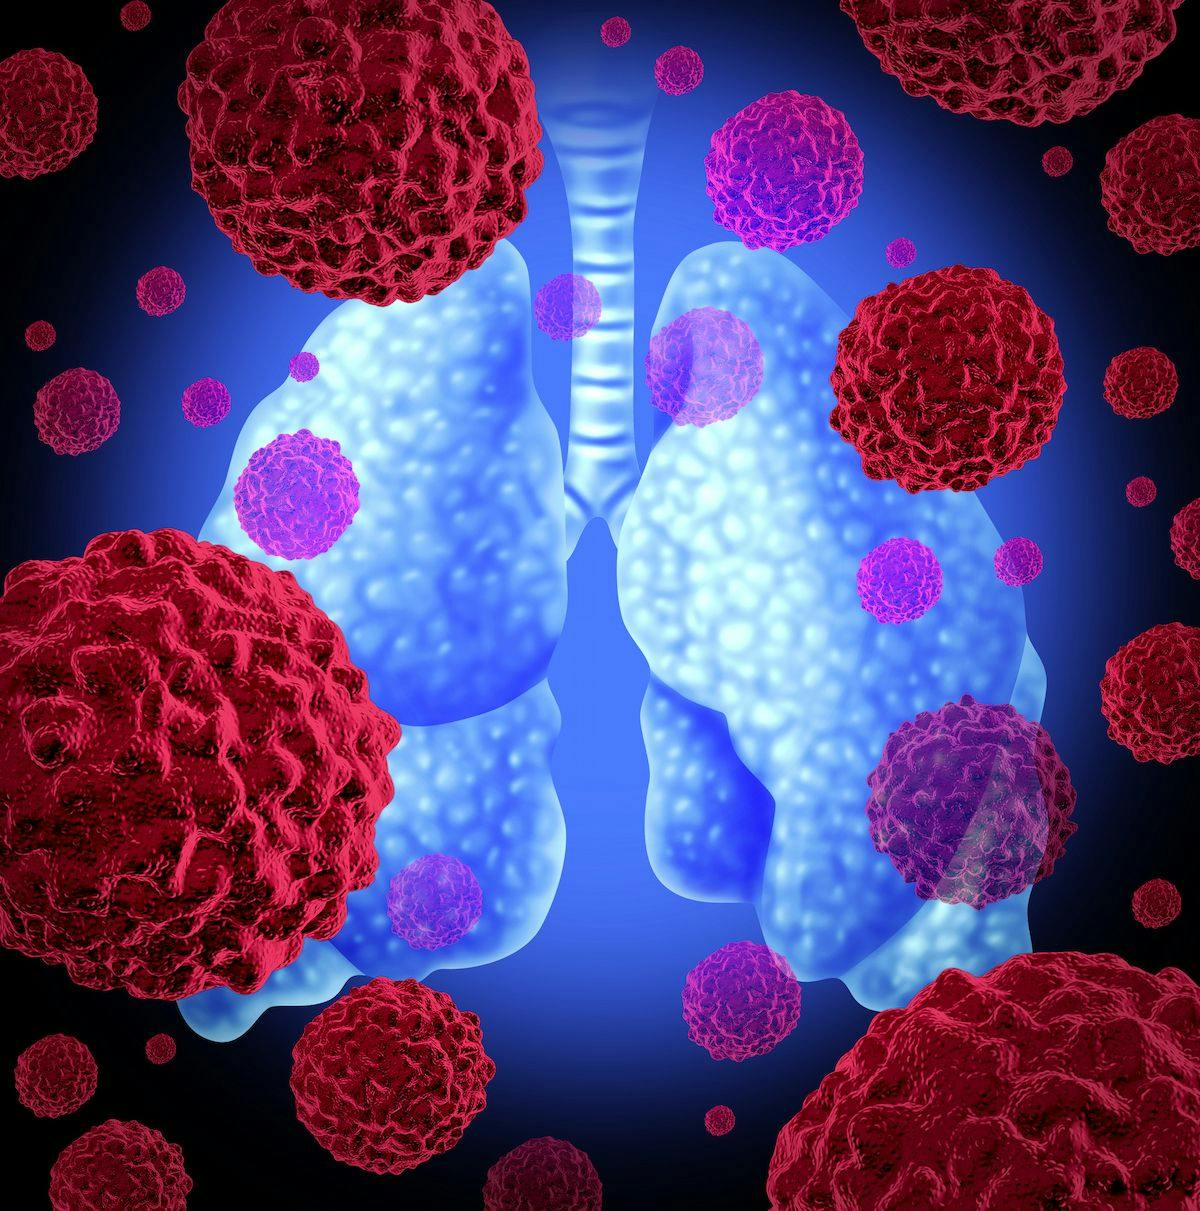 “The observed clinical outcomes and genomic alterations provide compelling evidence of the identification of oligoprogression in patients with metastatic NSCLC, who could therefore benefit from local ablative therapy,” according to the study authors.